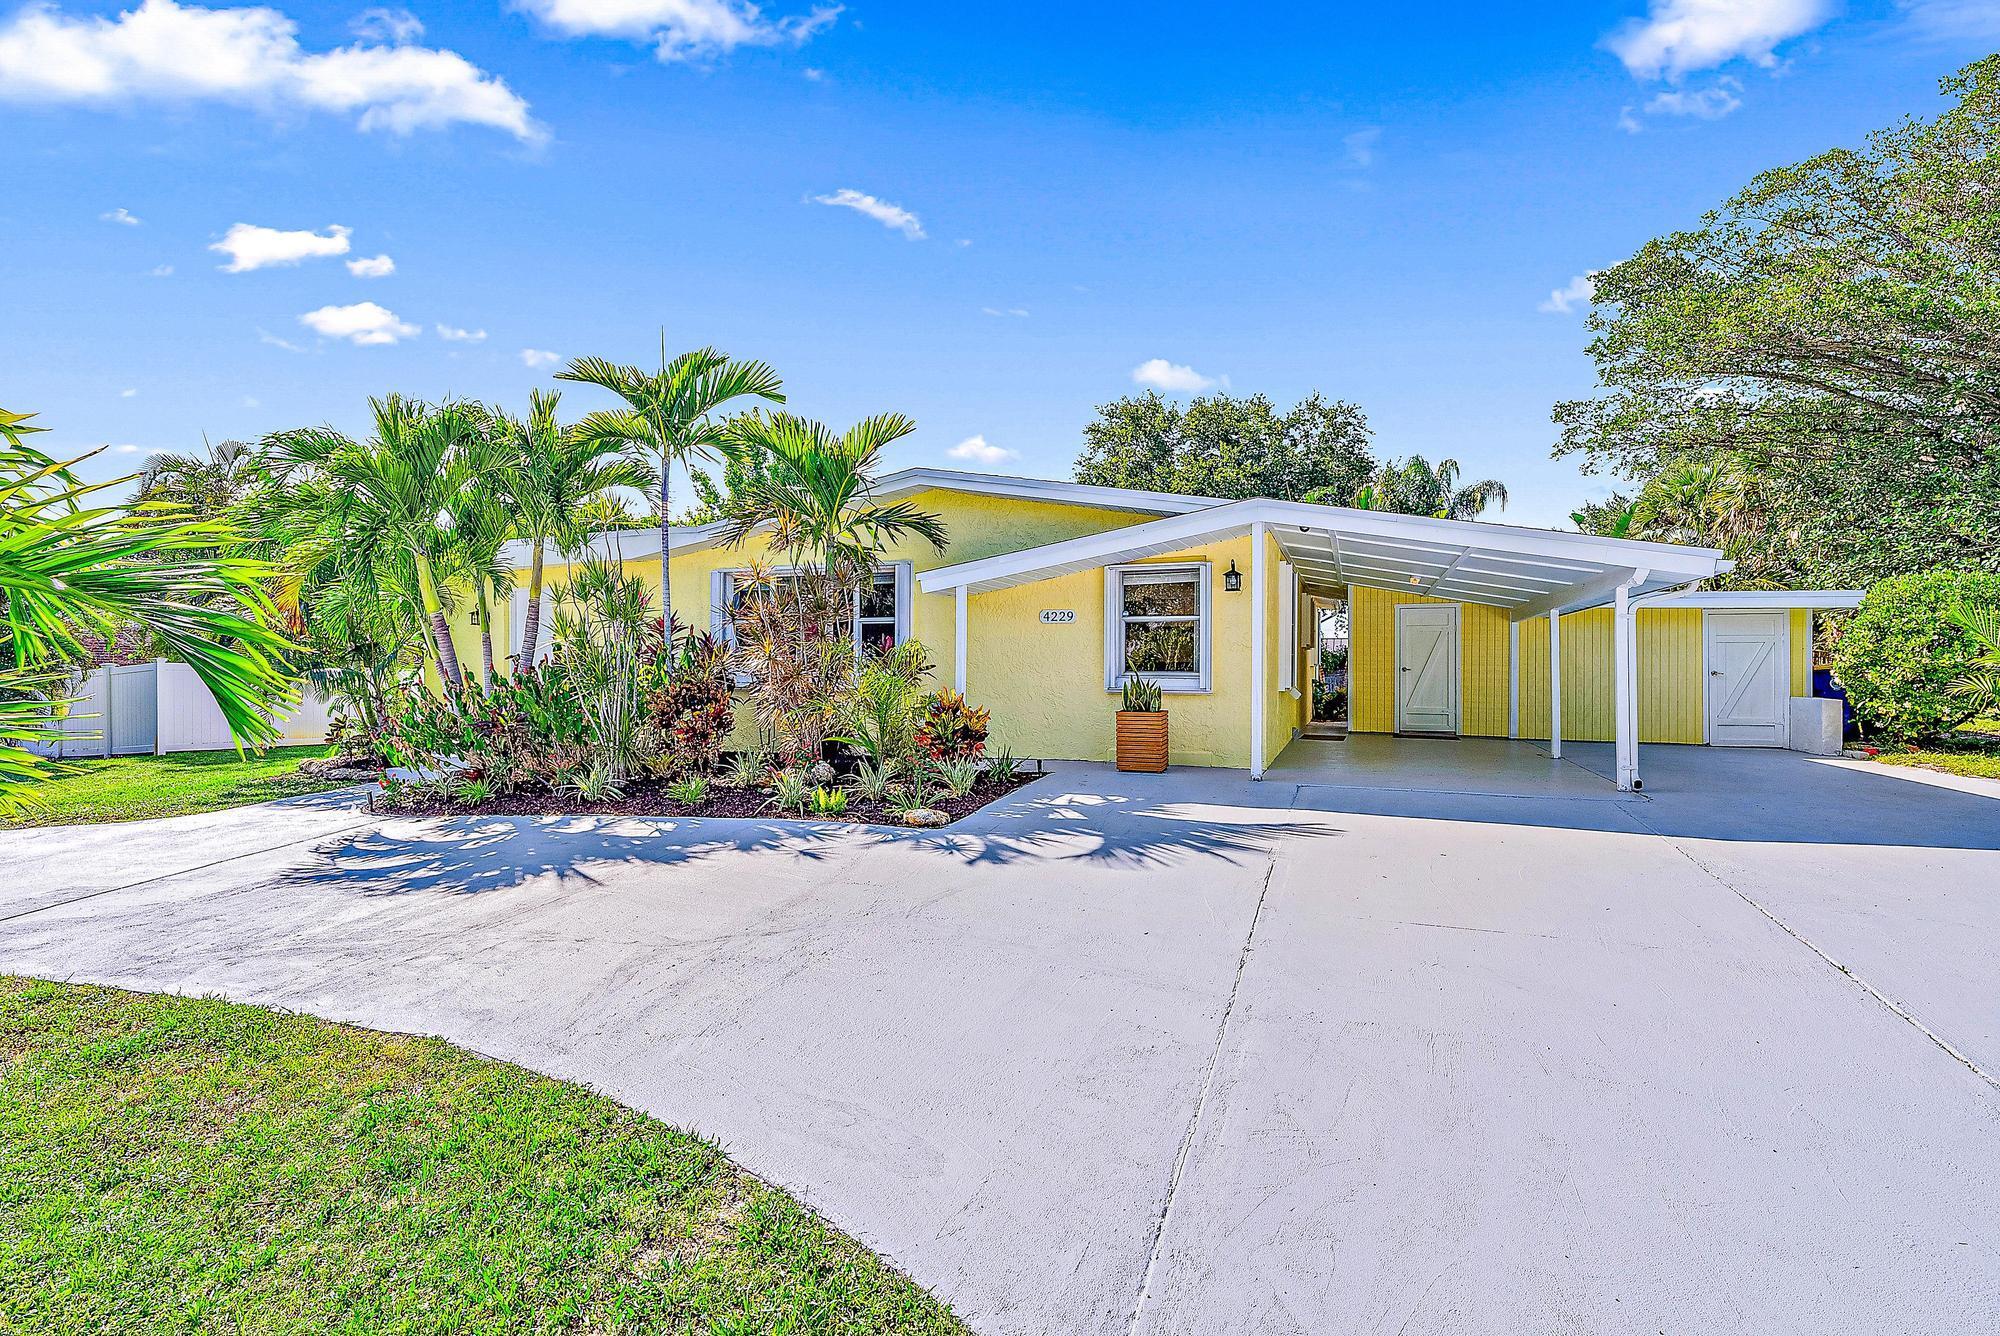 Renovated Gem in Highly Coveted Stuart Location, across the street  from Sandsprit Park & no HOA! Nestled on a small, quiet street off SE St Lucie Blvd, this updated 2 bed 1.5 bath home offers a blend of modern comfort and serene surroundings.  Boasting a new roof, AC Unit, septic & spacious layout, this residence is a rare find in one of Stuart's most sought-after areas.  As you step inside, you're greeted by a bright and airy living space...the kitchen features updated appliances and ample storage.  The bedrooms are cozy retreats, with plenty of natural light and closet space.  One of the highlights of this home is its huge backyard, offering plenty of space for your toys and possibility of adding a pool.  Make it your own private oasis! Located just across the street from Sandsprit Park, you'll enjoy easy access to the park's amenities, including boat launches and waterfront views.  With no HOA, you have the freedom to make this home your own.  Don't miss out on this hidden gem in Stuart.  Schedule a showing today and make this your dream home!